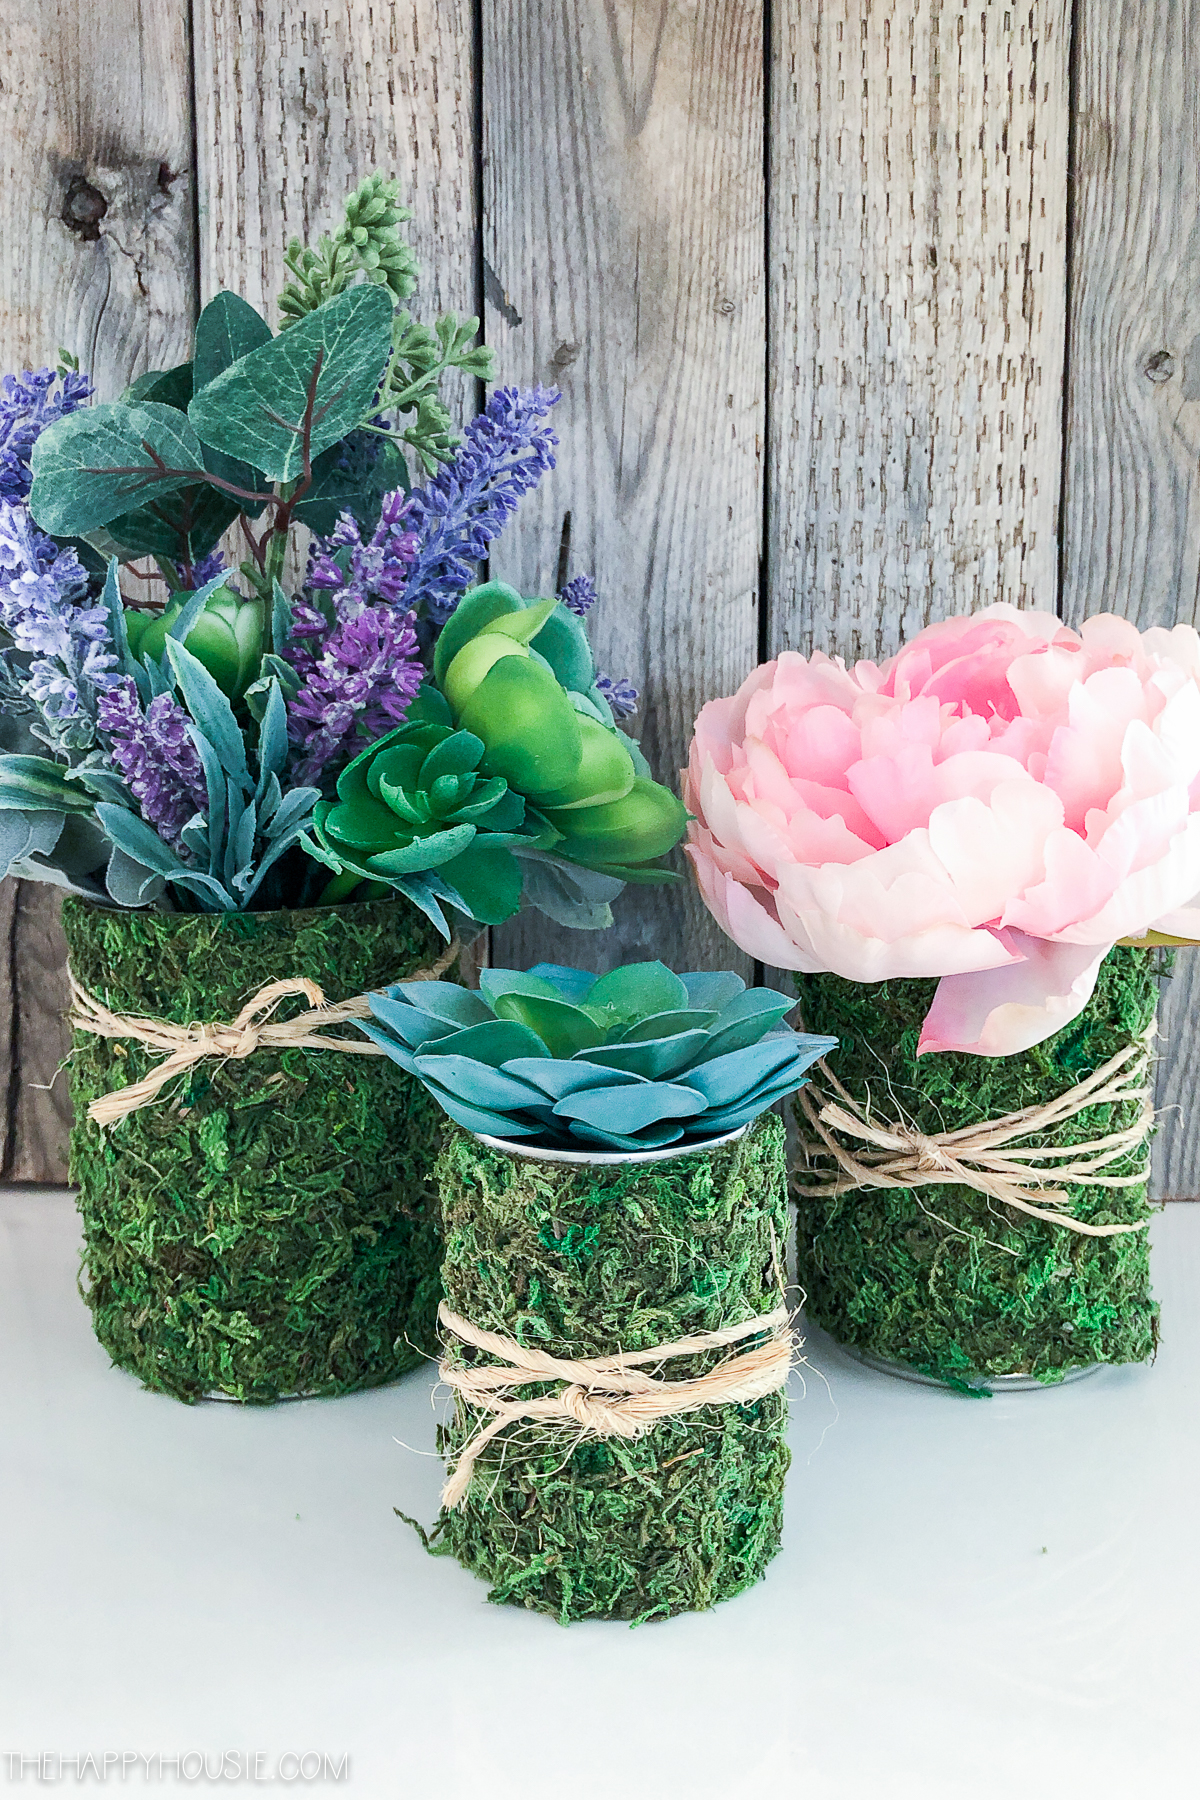 Succulents, and florals in the moss covered cans.